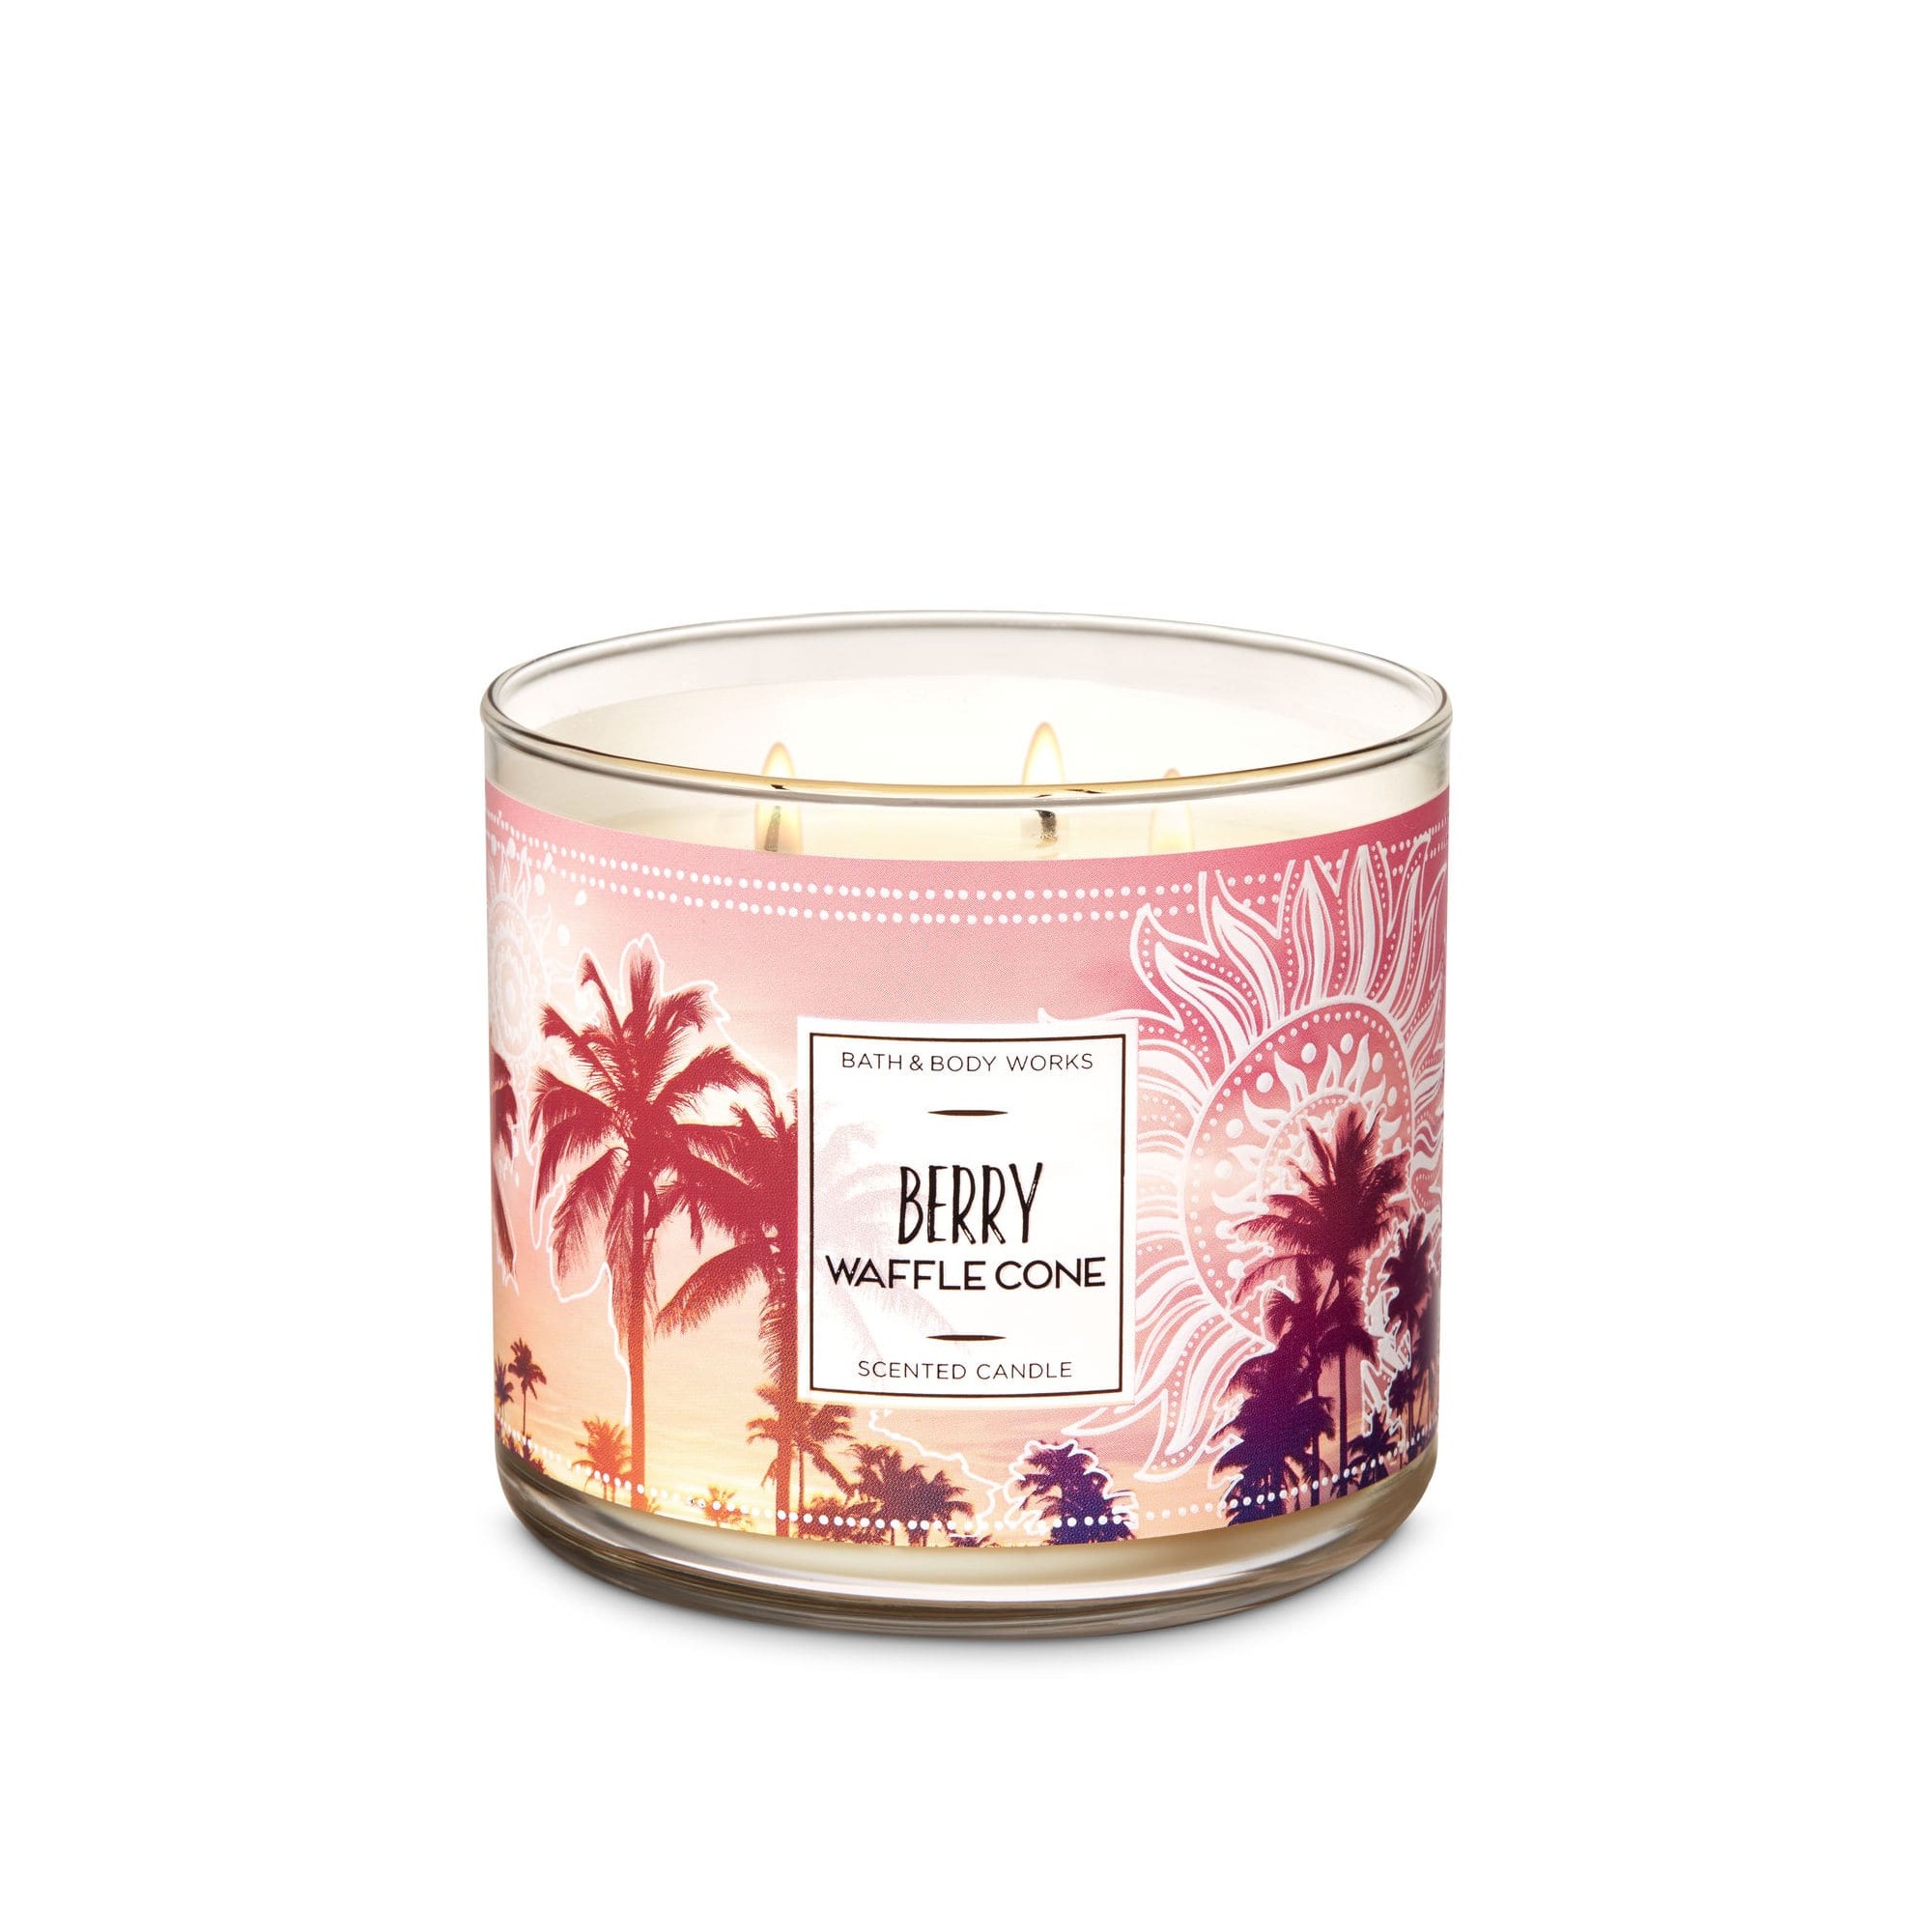 Bath & Body Works Berry Waffle Cone 3 Wick Scented Candle